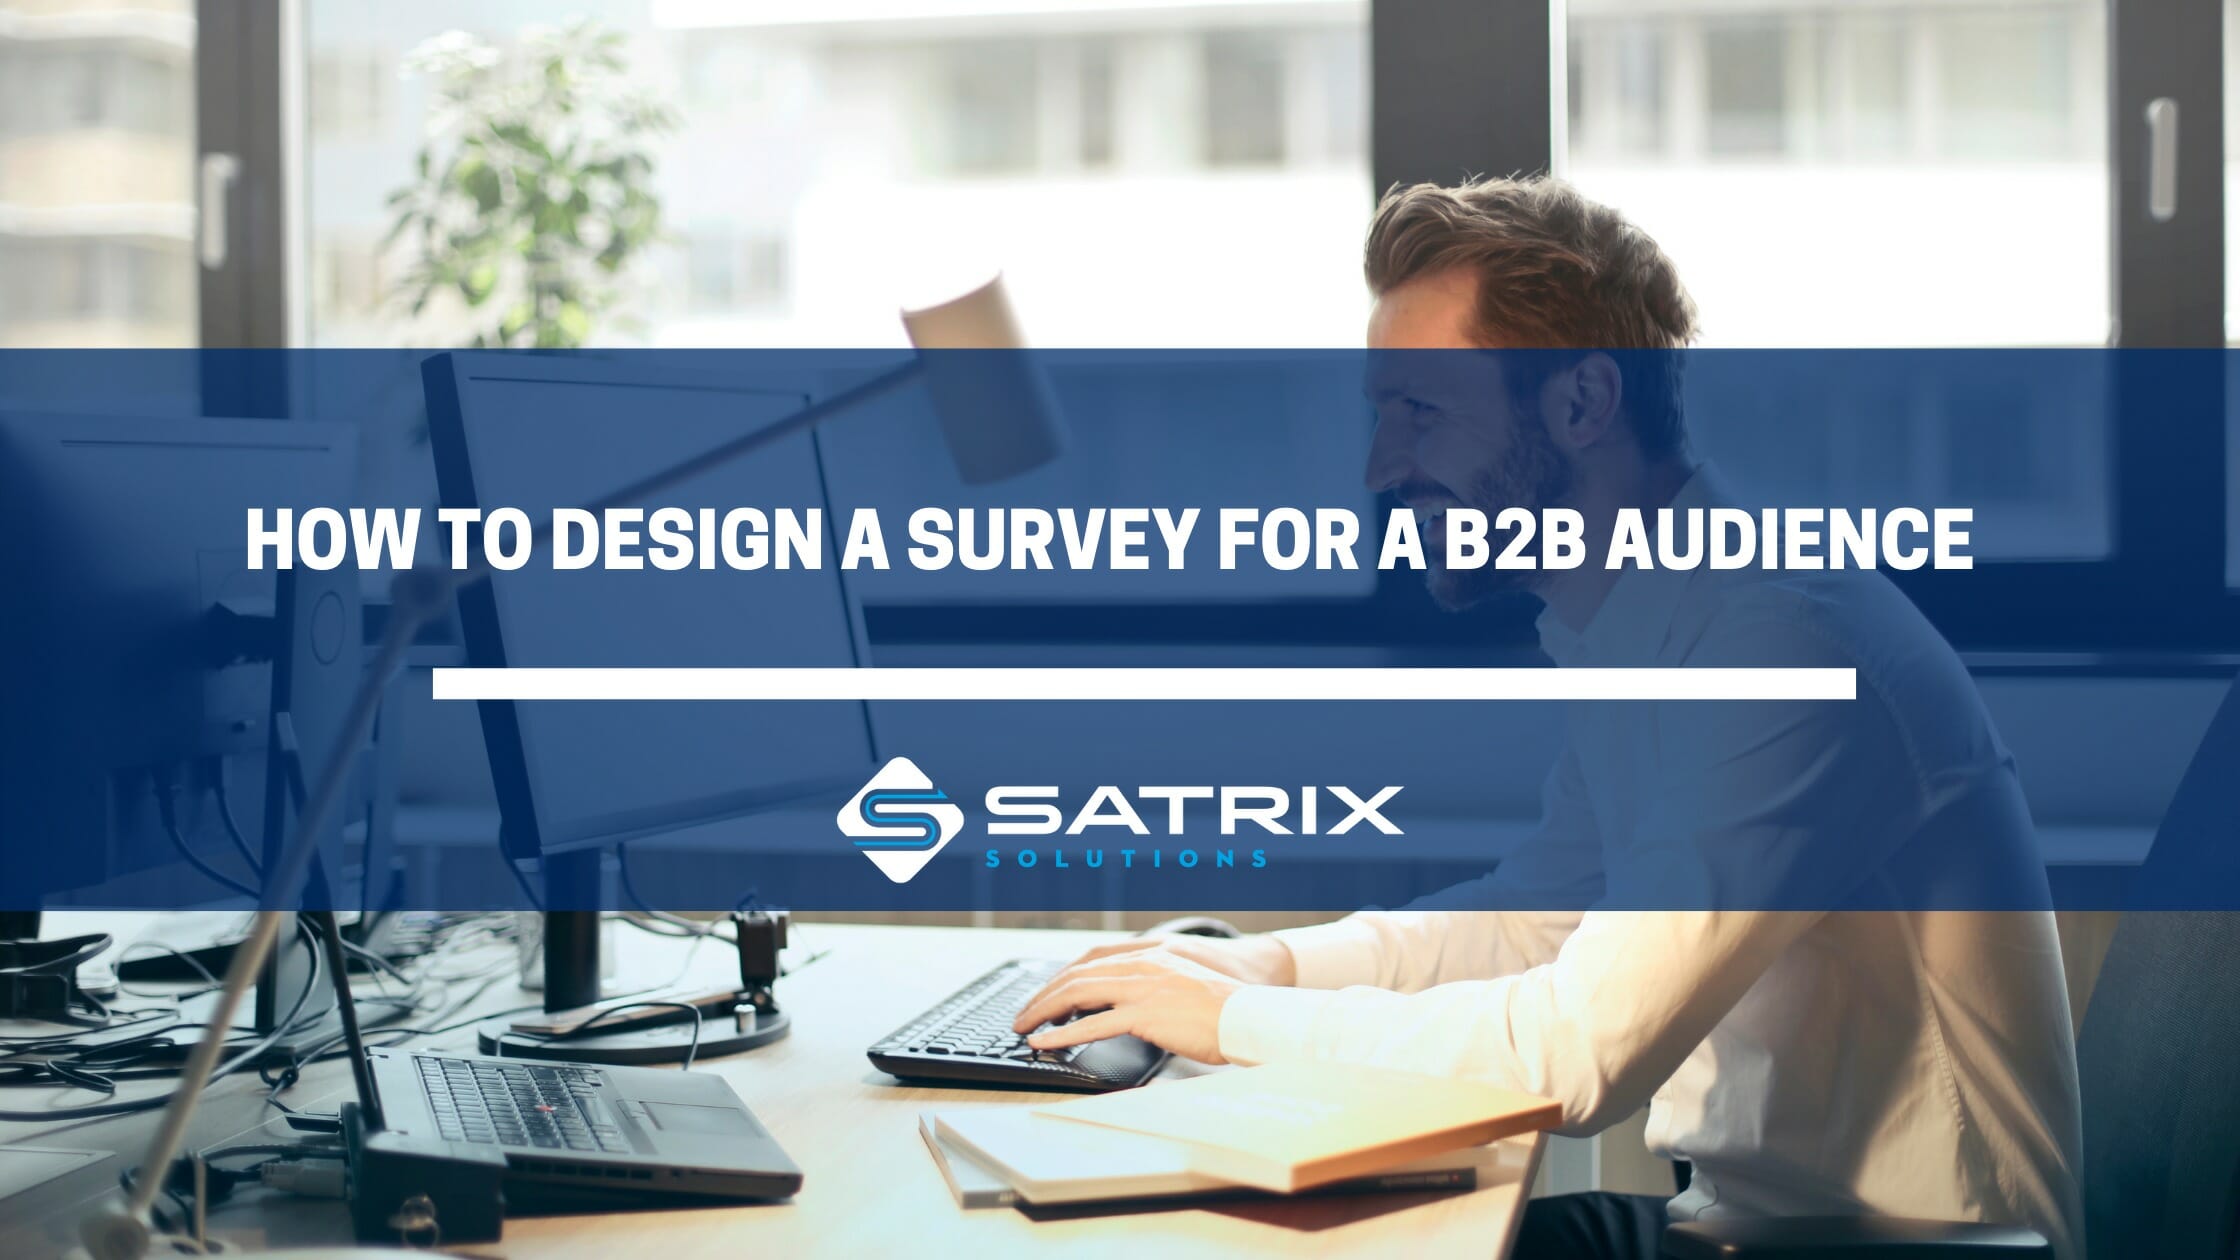 How to Design a Survey for a B2B Audience